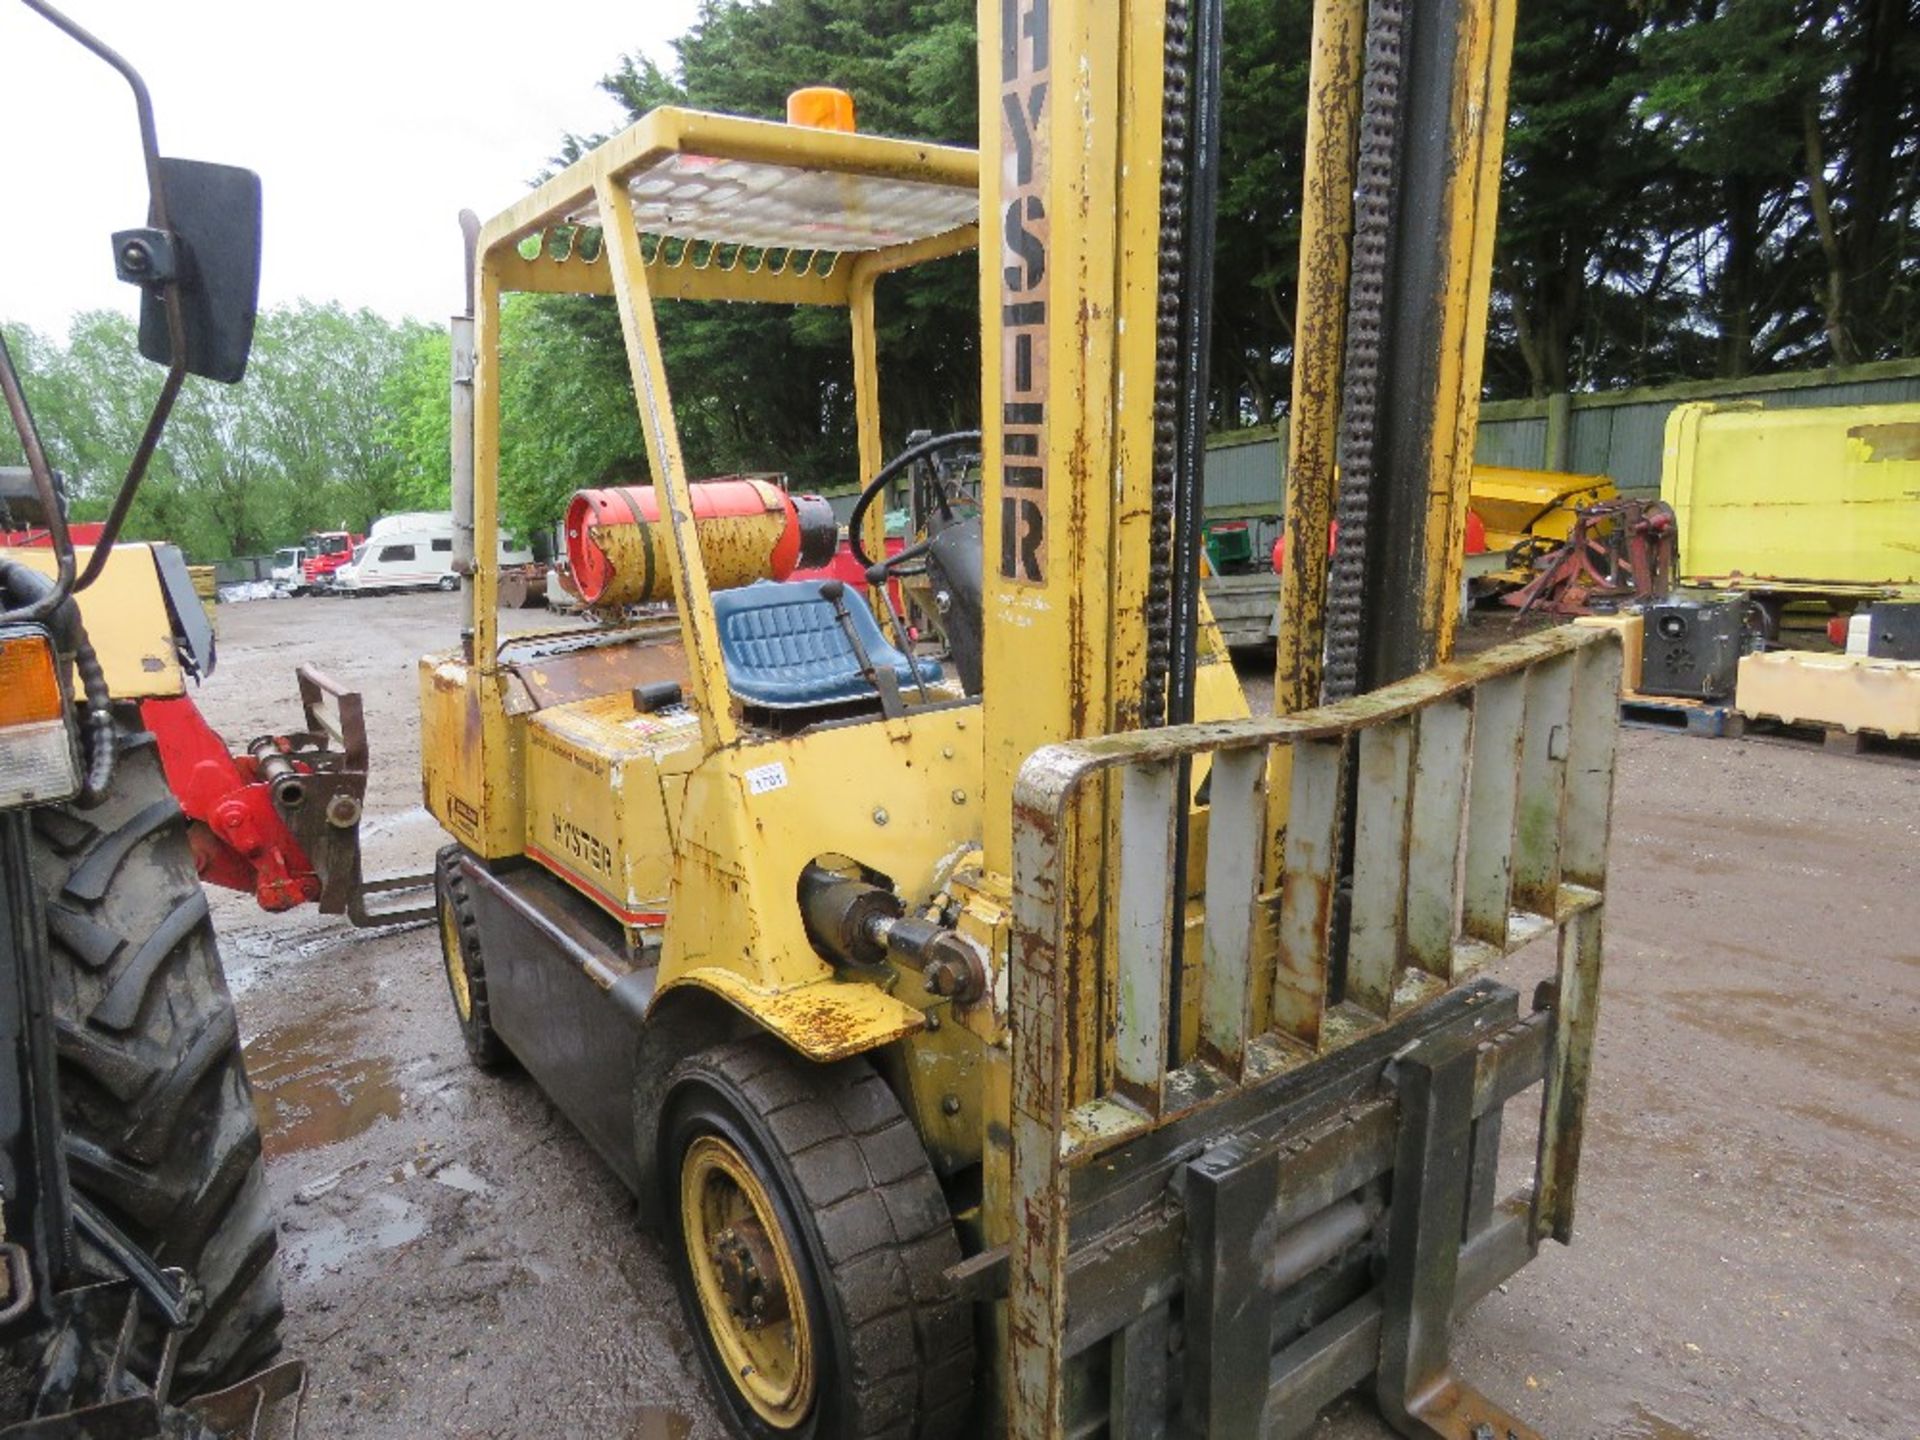 HYSTER GAS POWERED FORKLIFT TRUCK WITH SIDE SHIFT, 3.5 TONNE RATED LIFT CAPACITY. WHEN TESTED WAS SE - Image 3 of 11